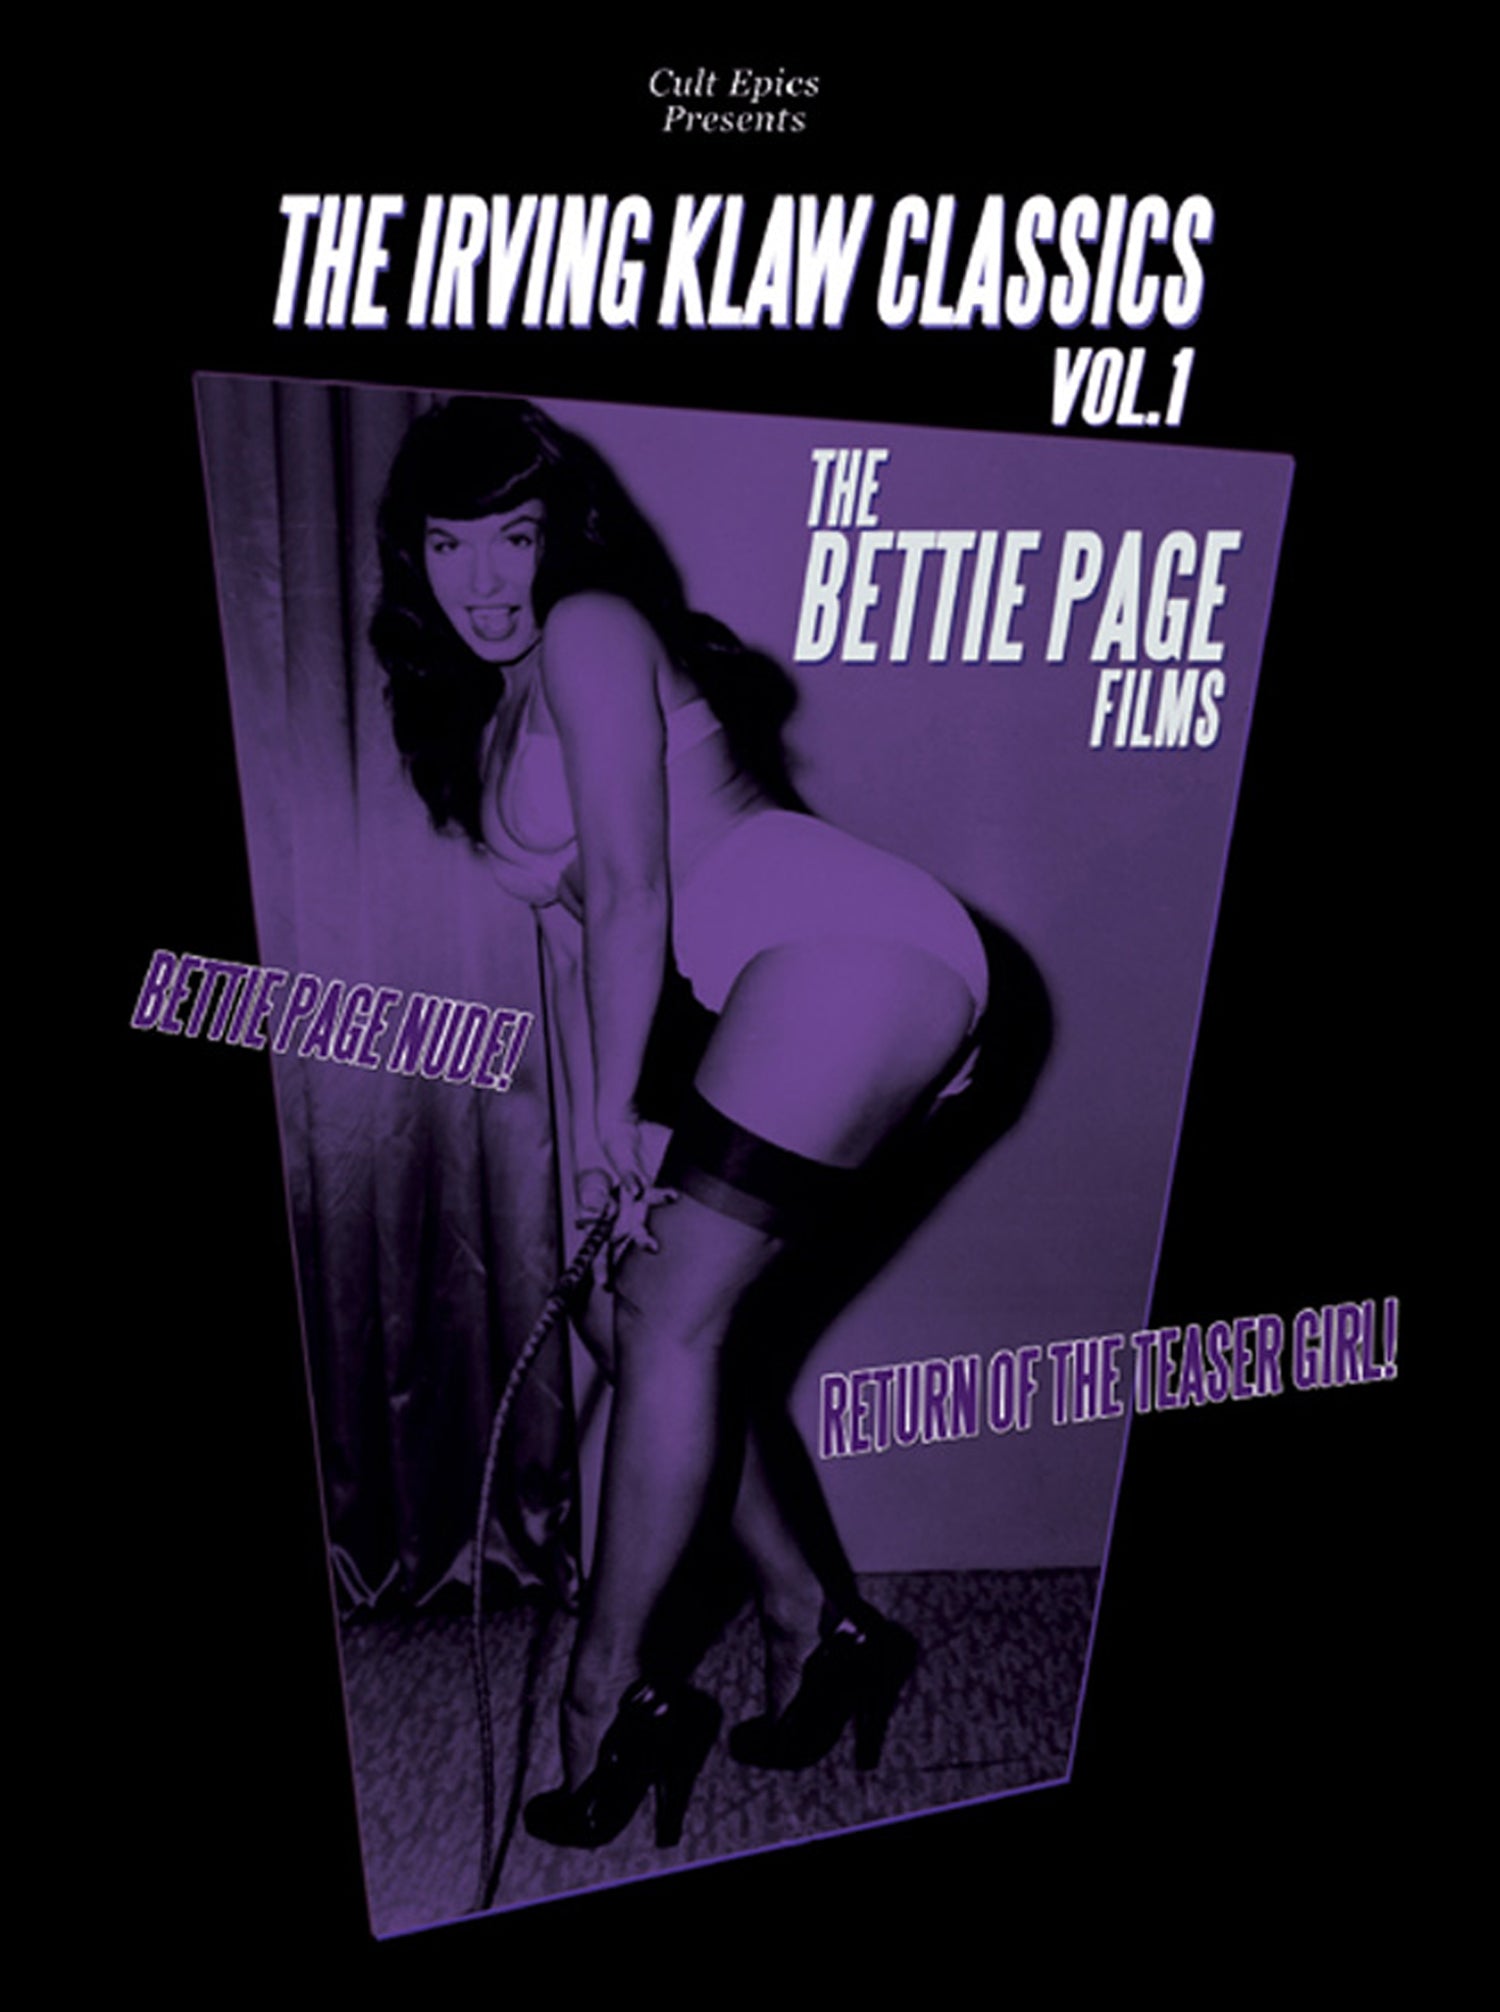 THE IRVING KLAW CLASSICS VOLUME 1: THE BETTIE PAGE FILMS DVD